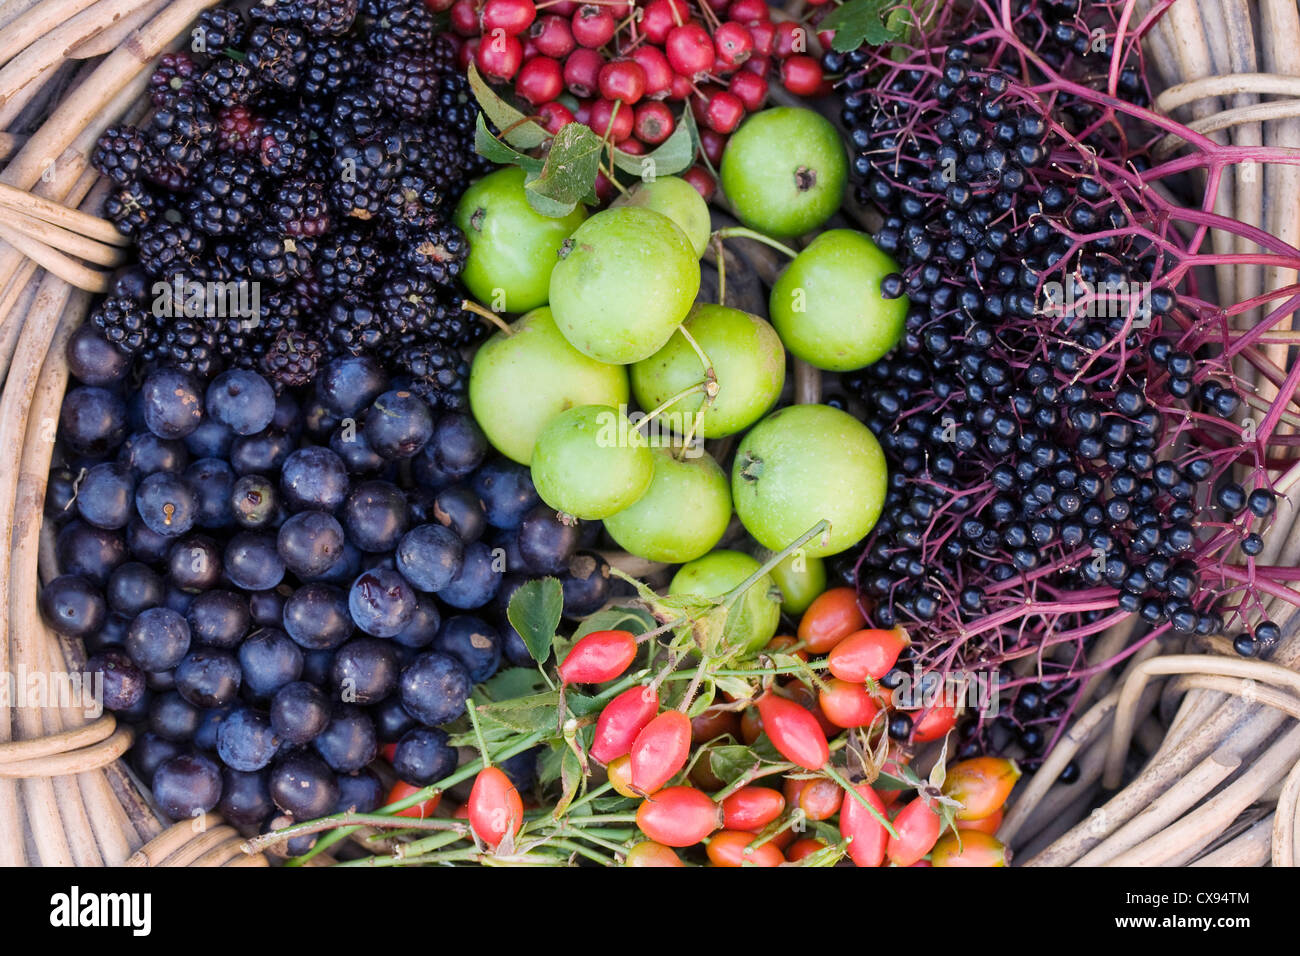 Fruits collected from the hedgerow in a basket. Stock Photo